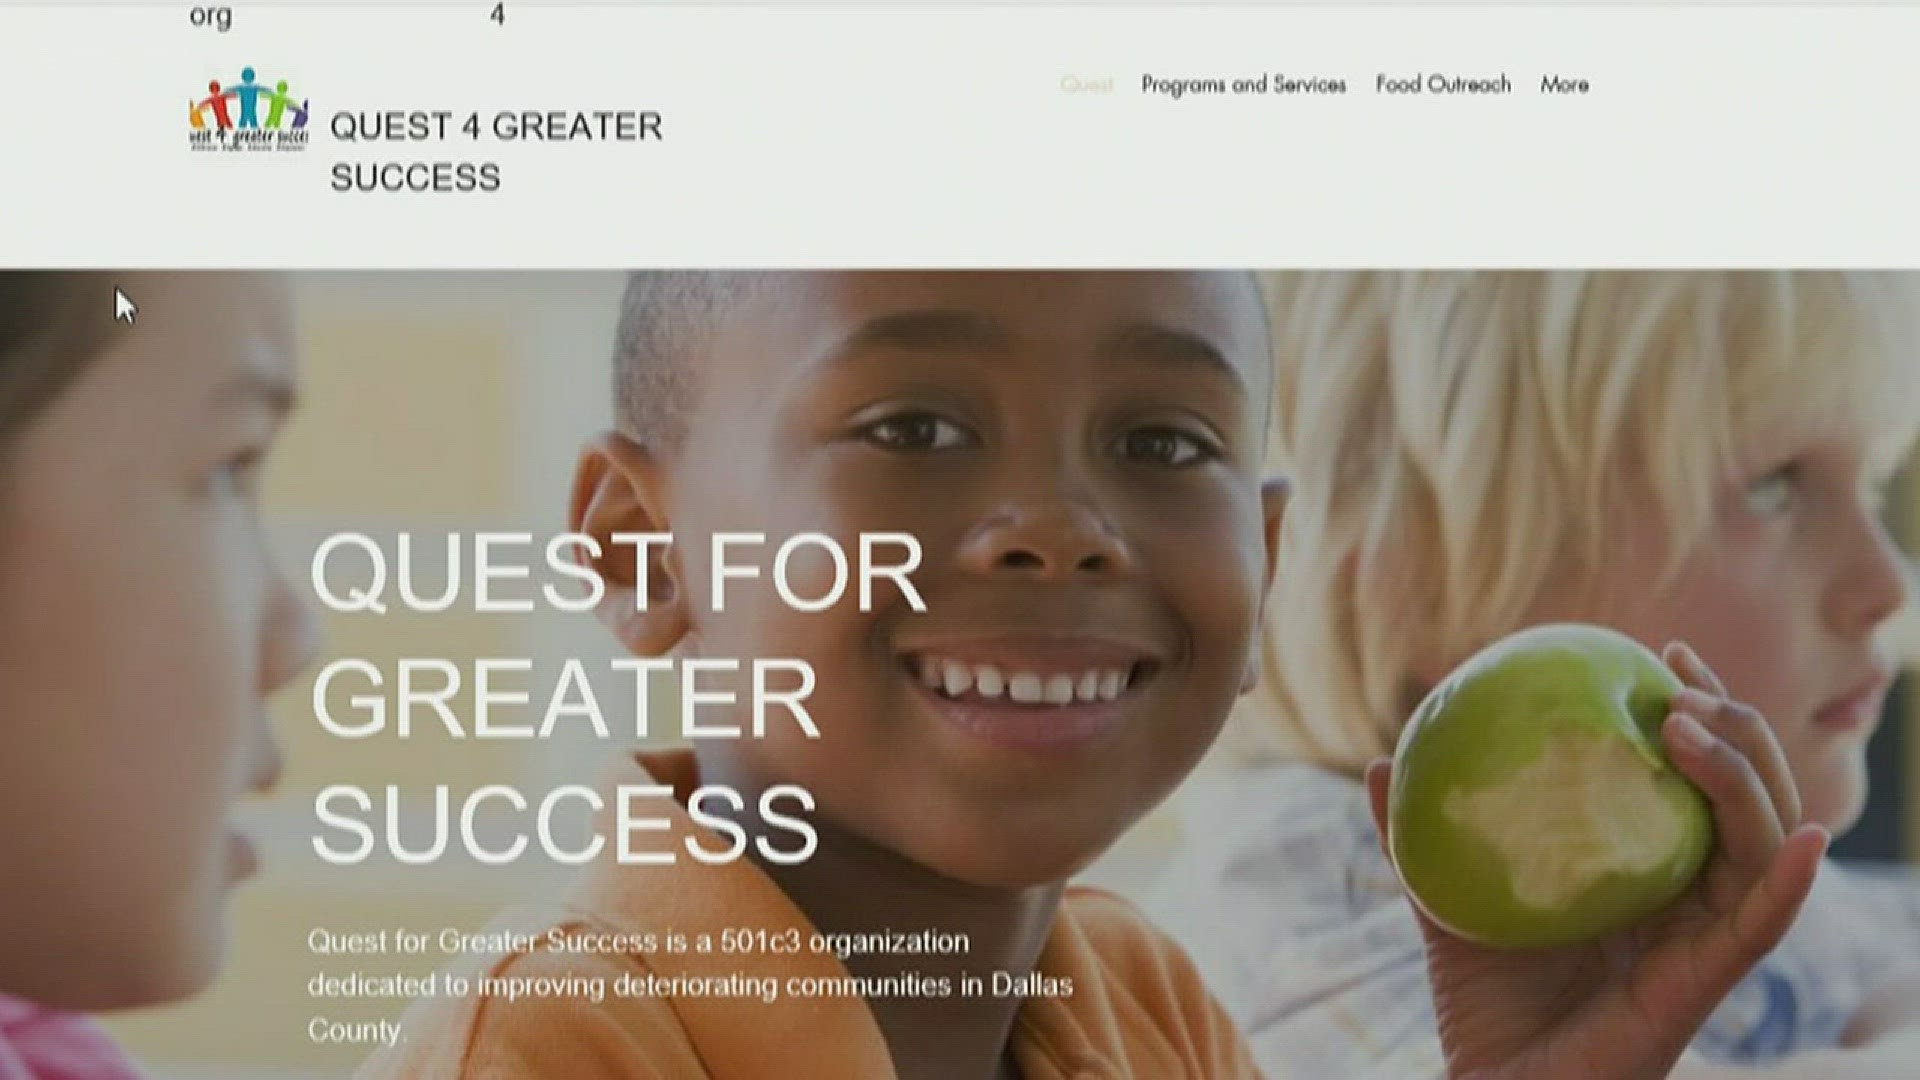 Quest 4 Greater Success is working to open a new space after a fire destroyed the old food pantry three months ago.